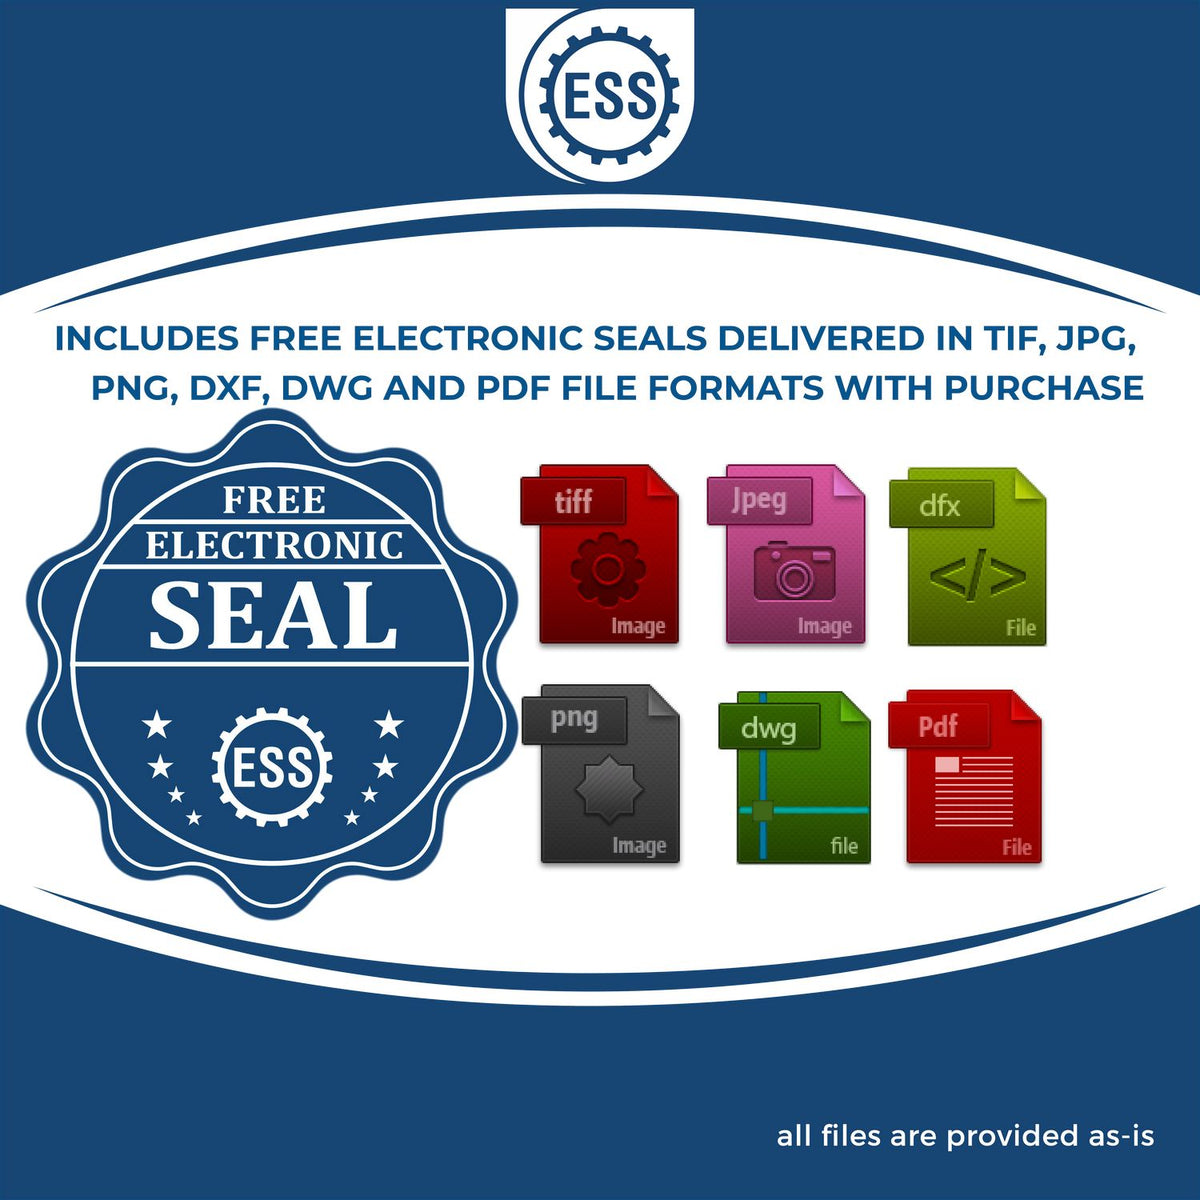 An infographic for the free electronic seal for the Wooden Handle Colorado Rectangular Notary Public Stamp illustrating the different file type icons such as DXF, DWG, TIF, JPG and PNG.